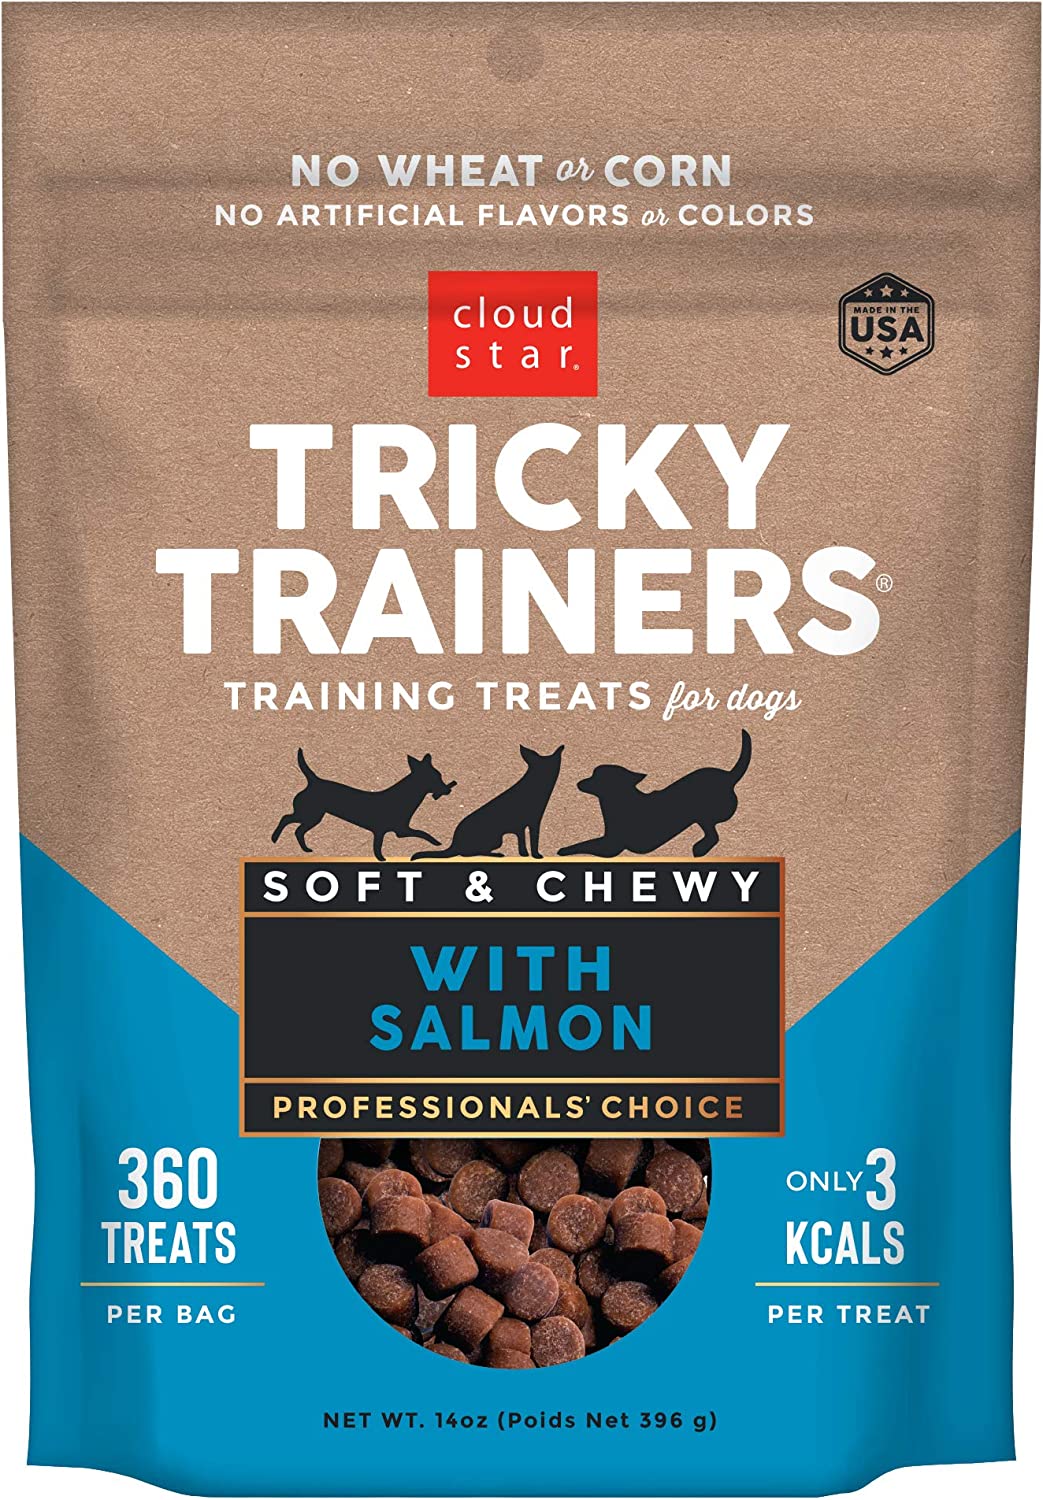 Cloud Star Tricky Trainers Chewy Salmon & Grain Free, Low Calorie Dog Training Treats, Baked in the USA (14 oz)